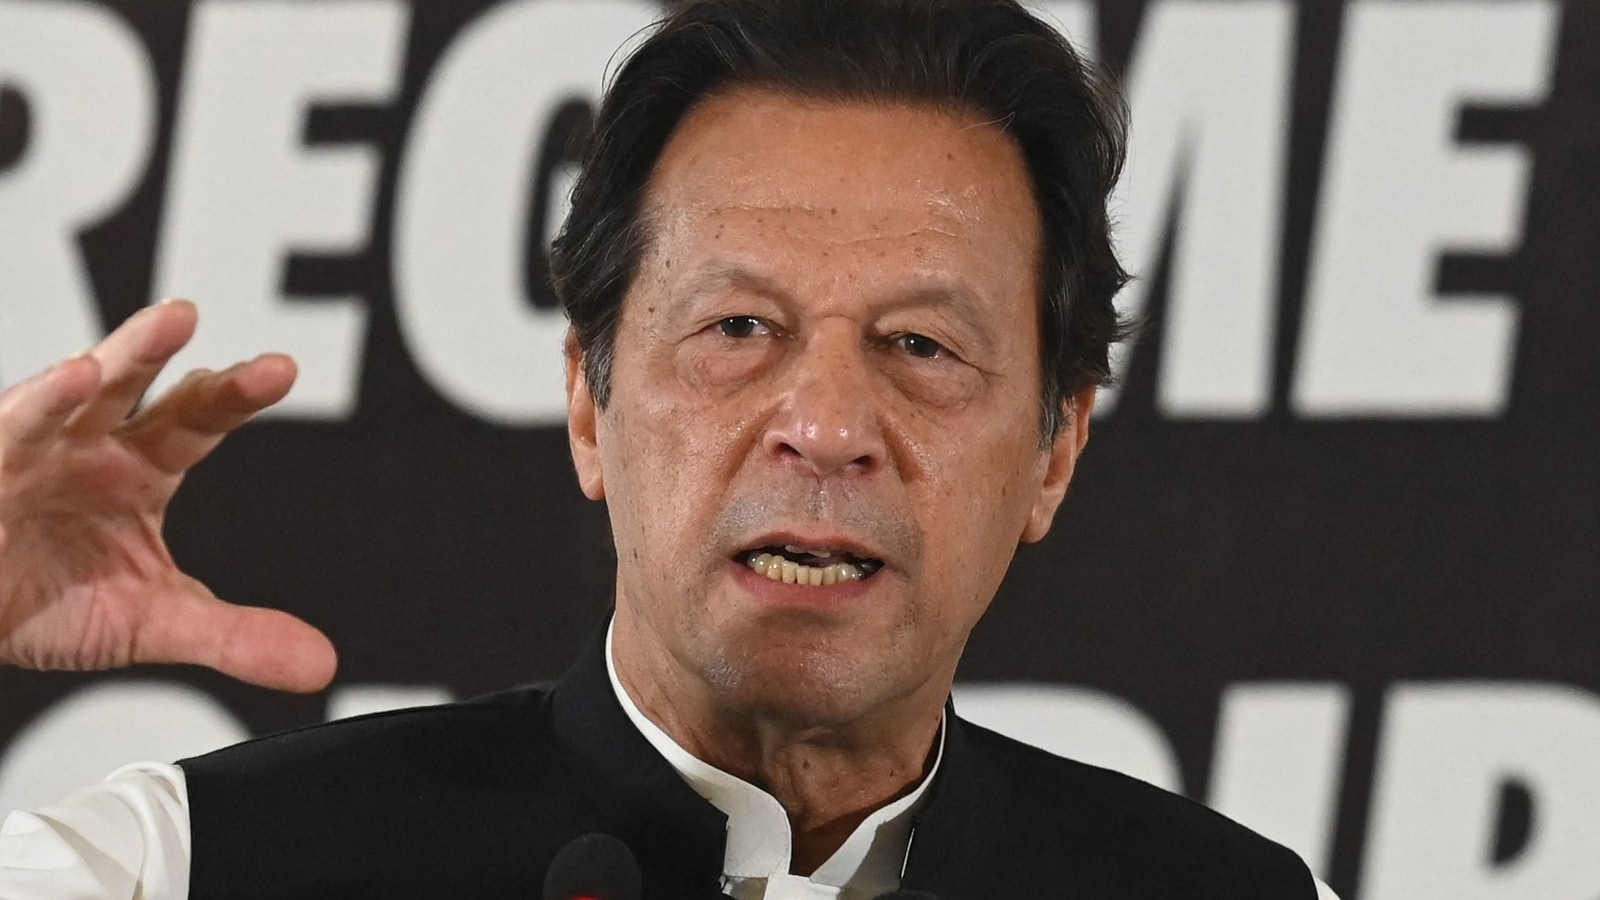 Pakistan Govt Sunk To New Low Ex Pm Imran Khan After Ban On His Live Speeches World News